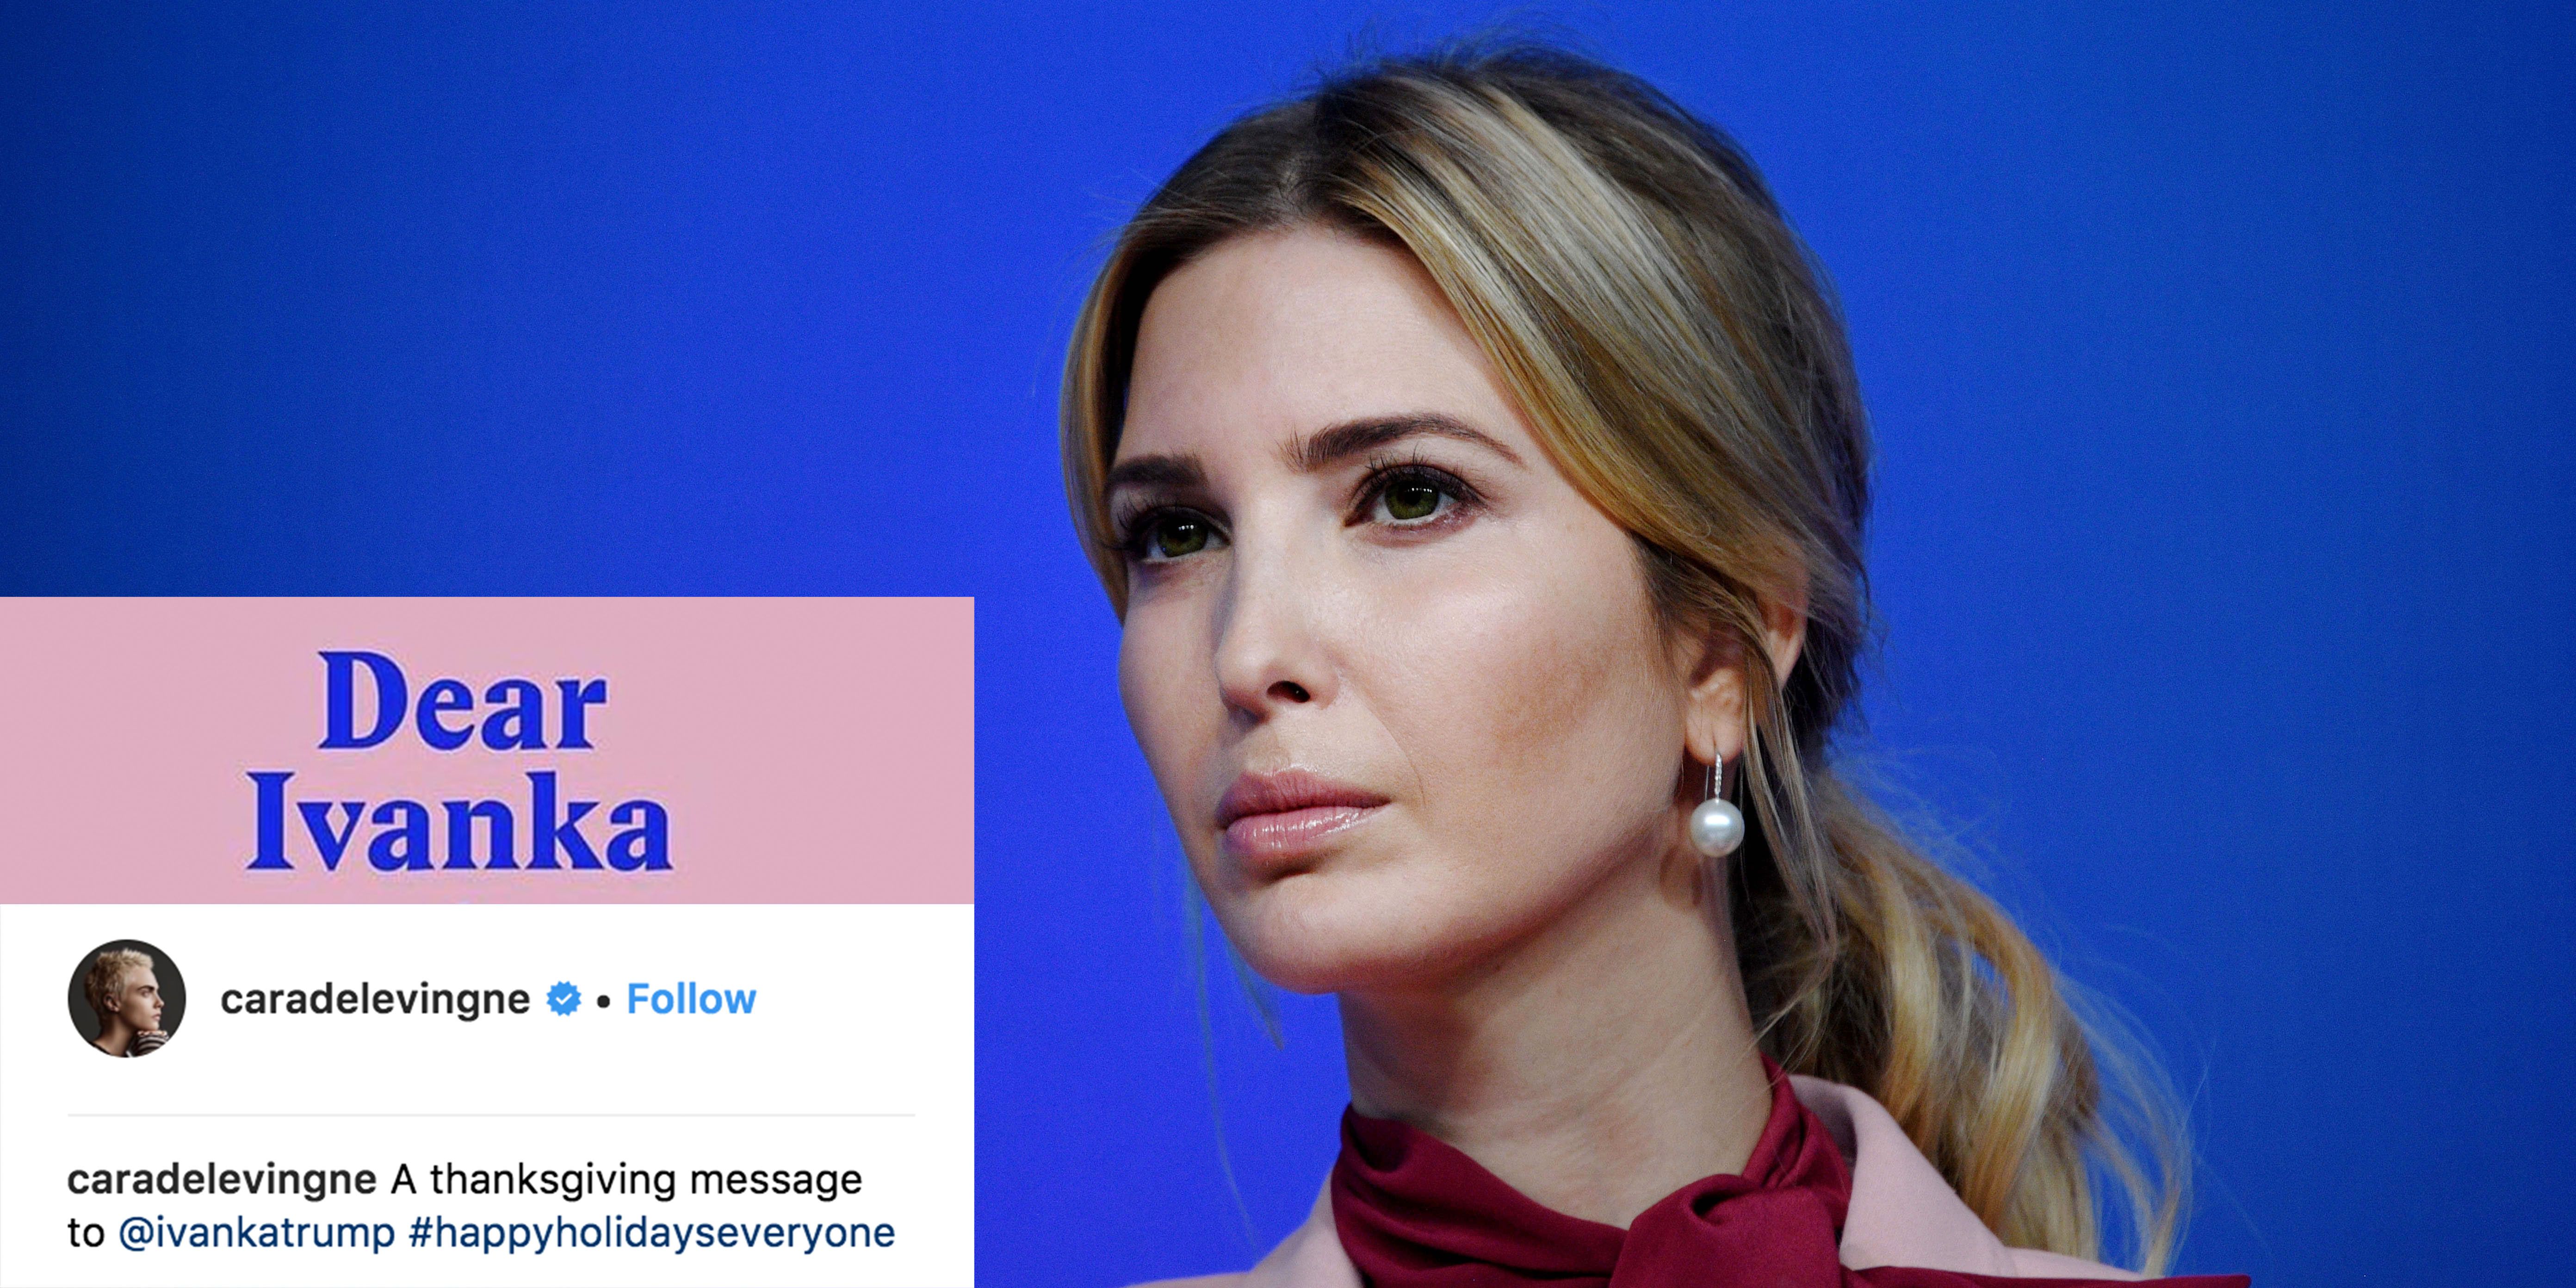 What is the celeb message to ivanka